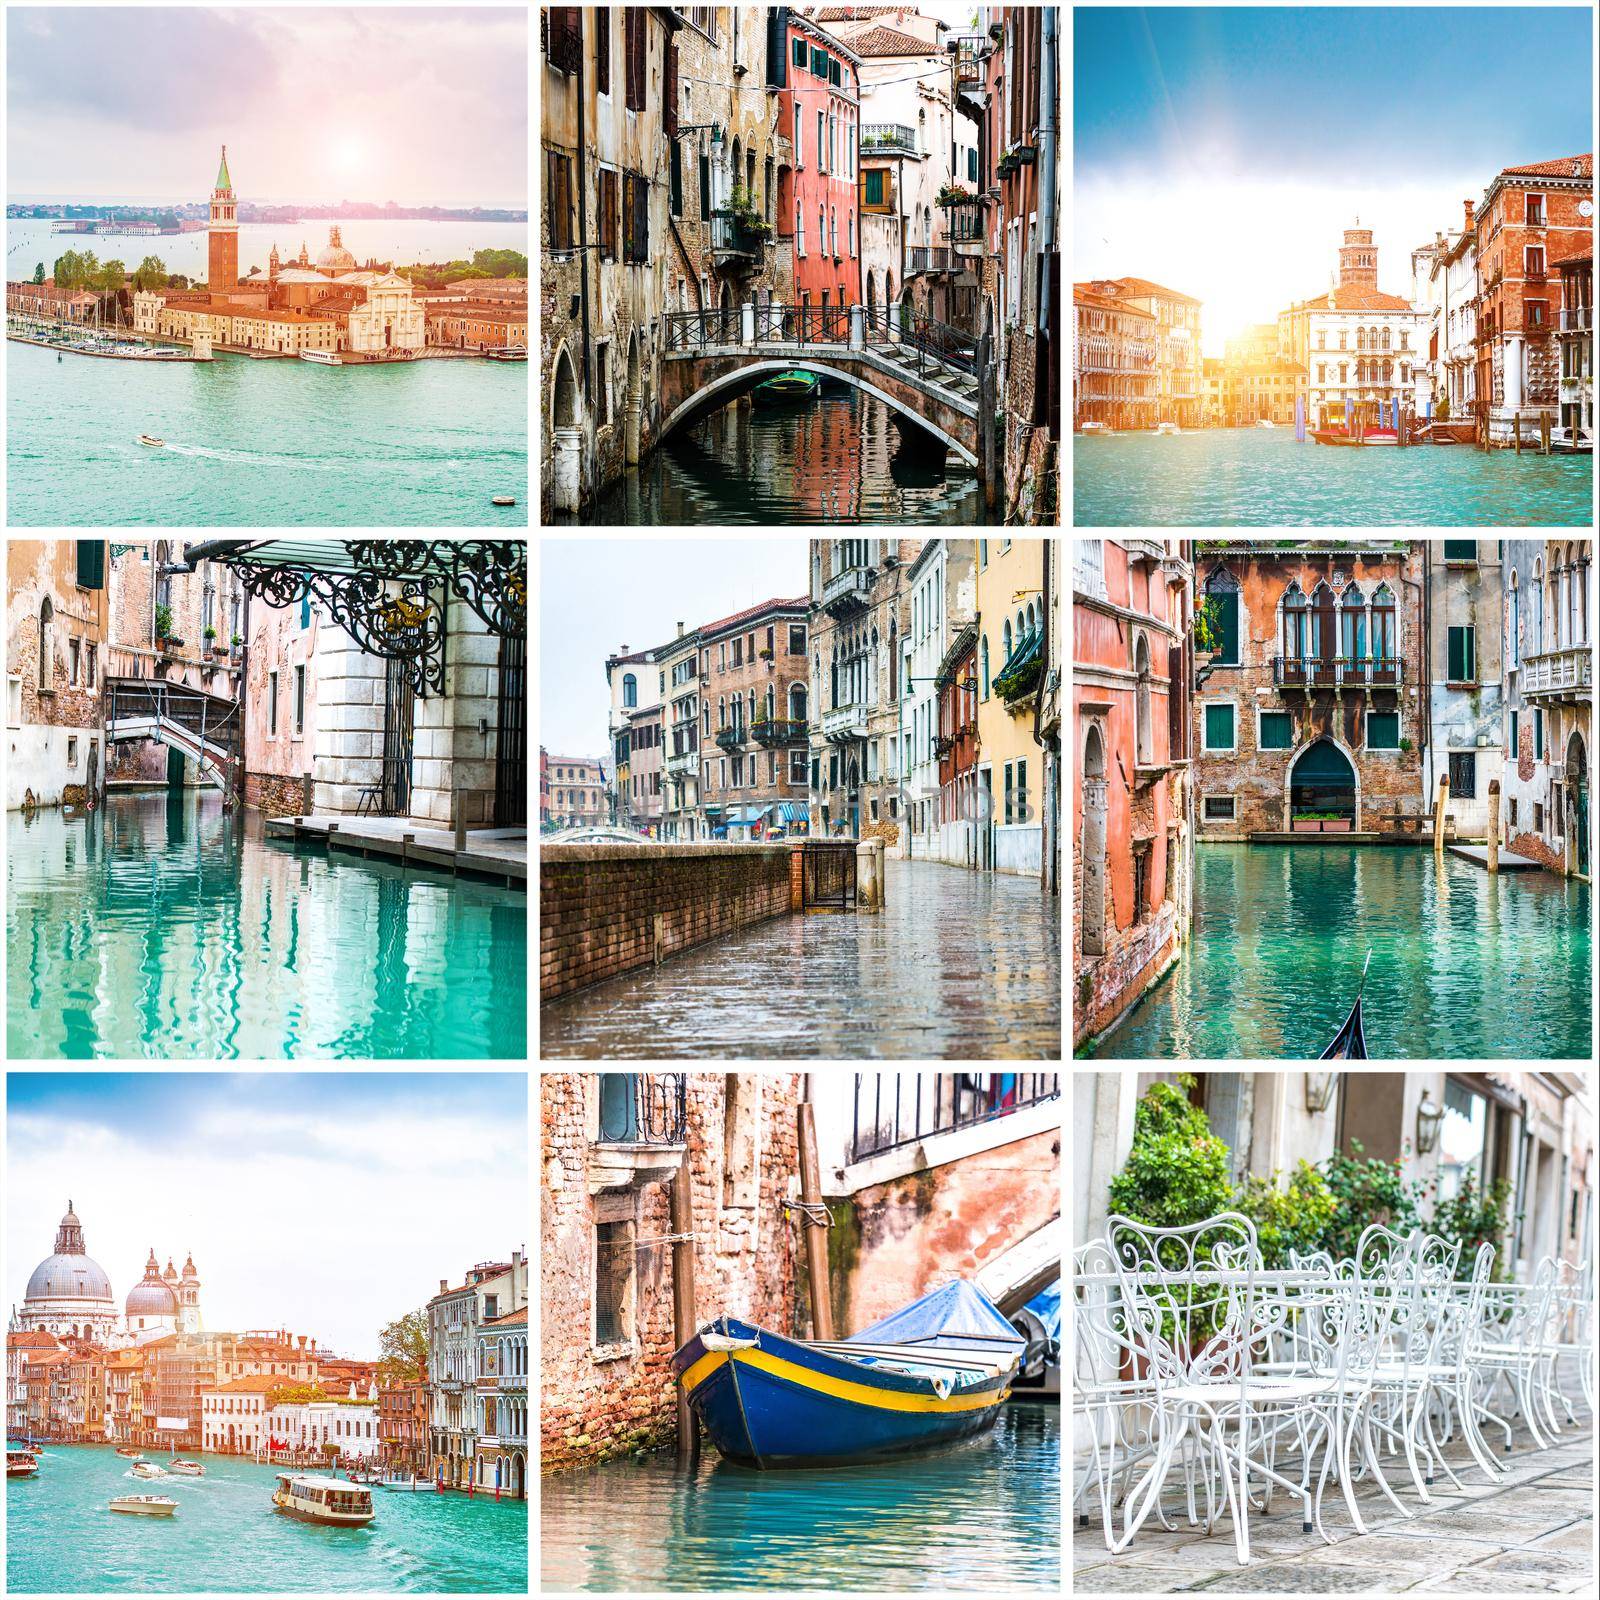 Collage of photos from Venice by tan4ikk1